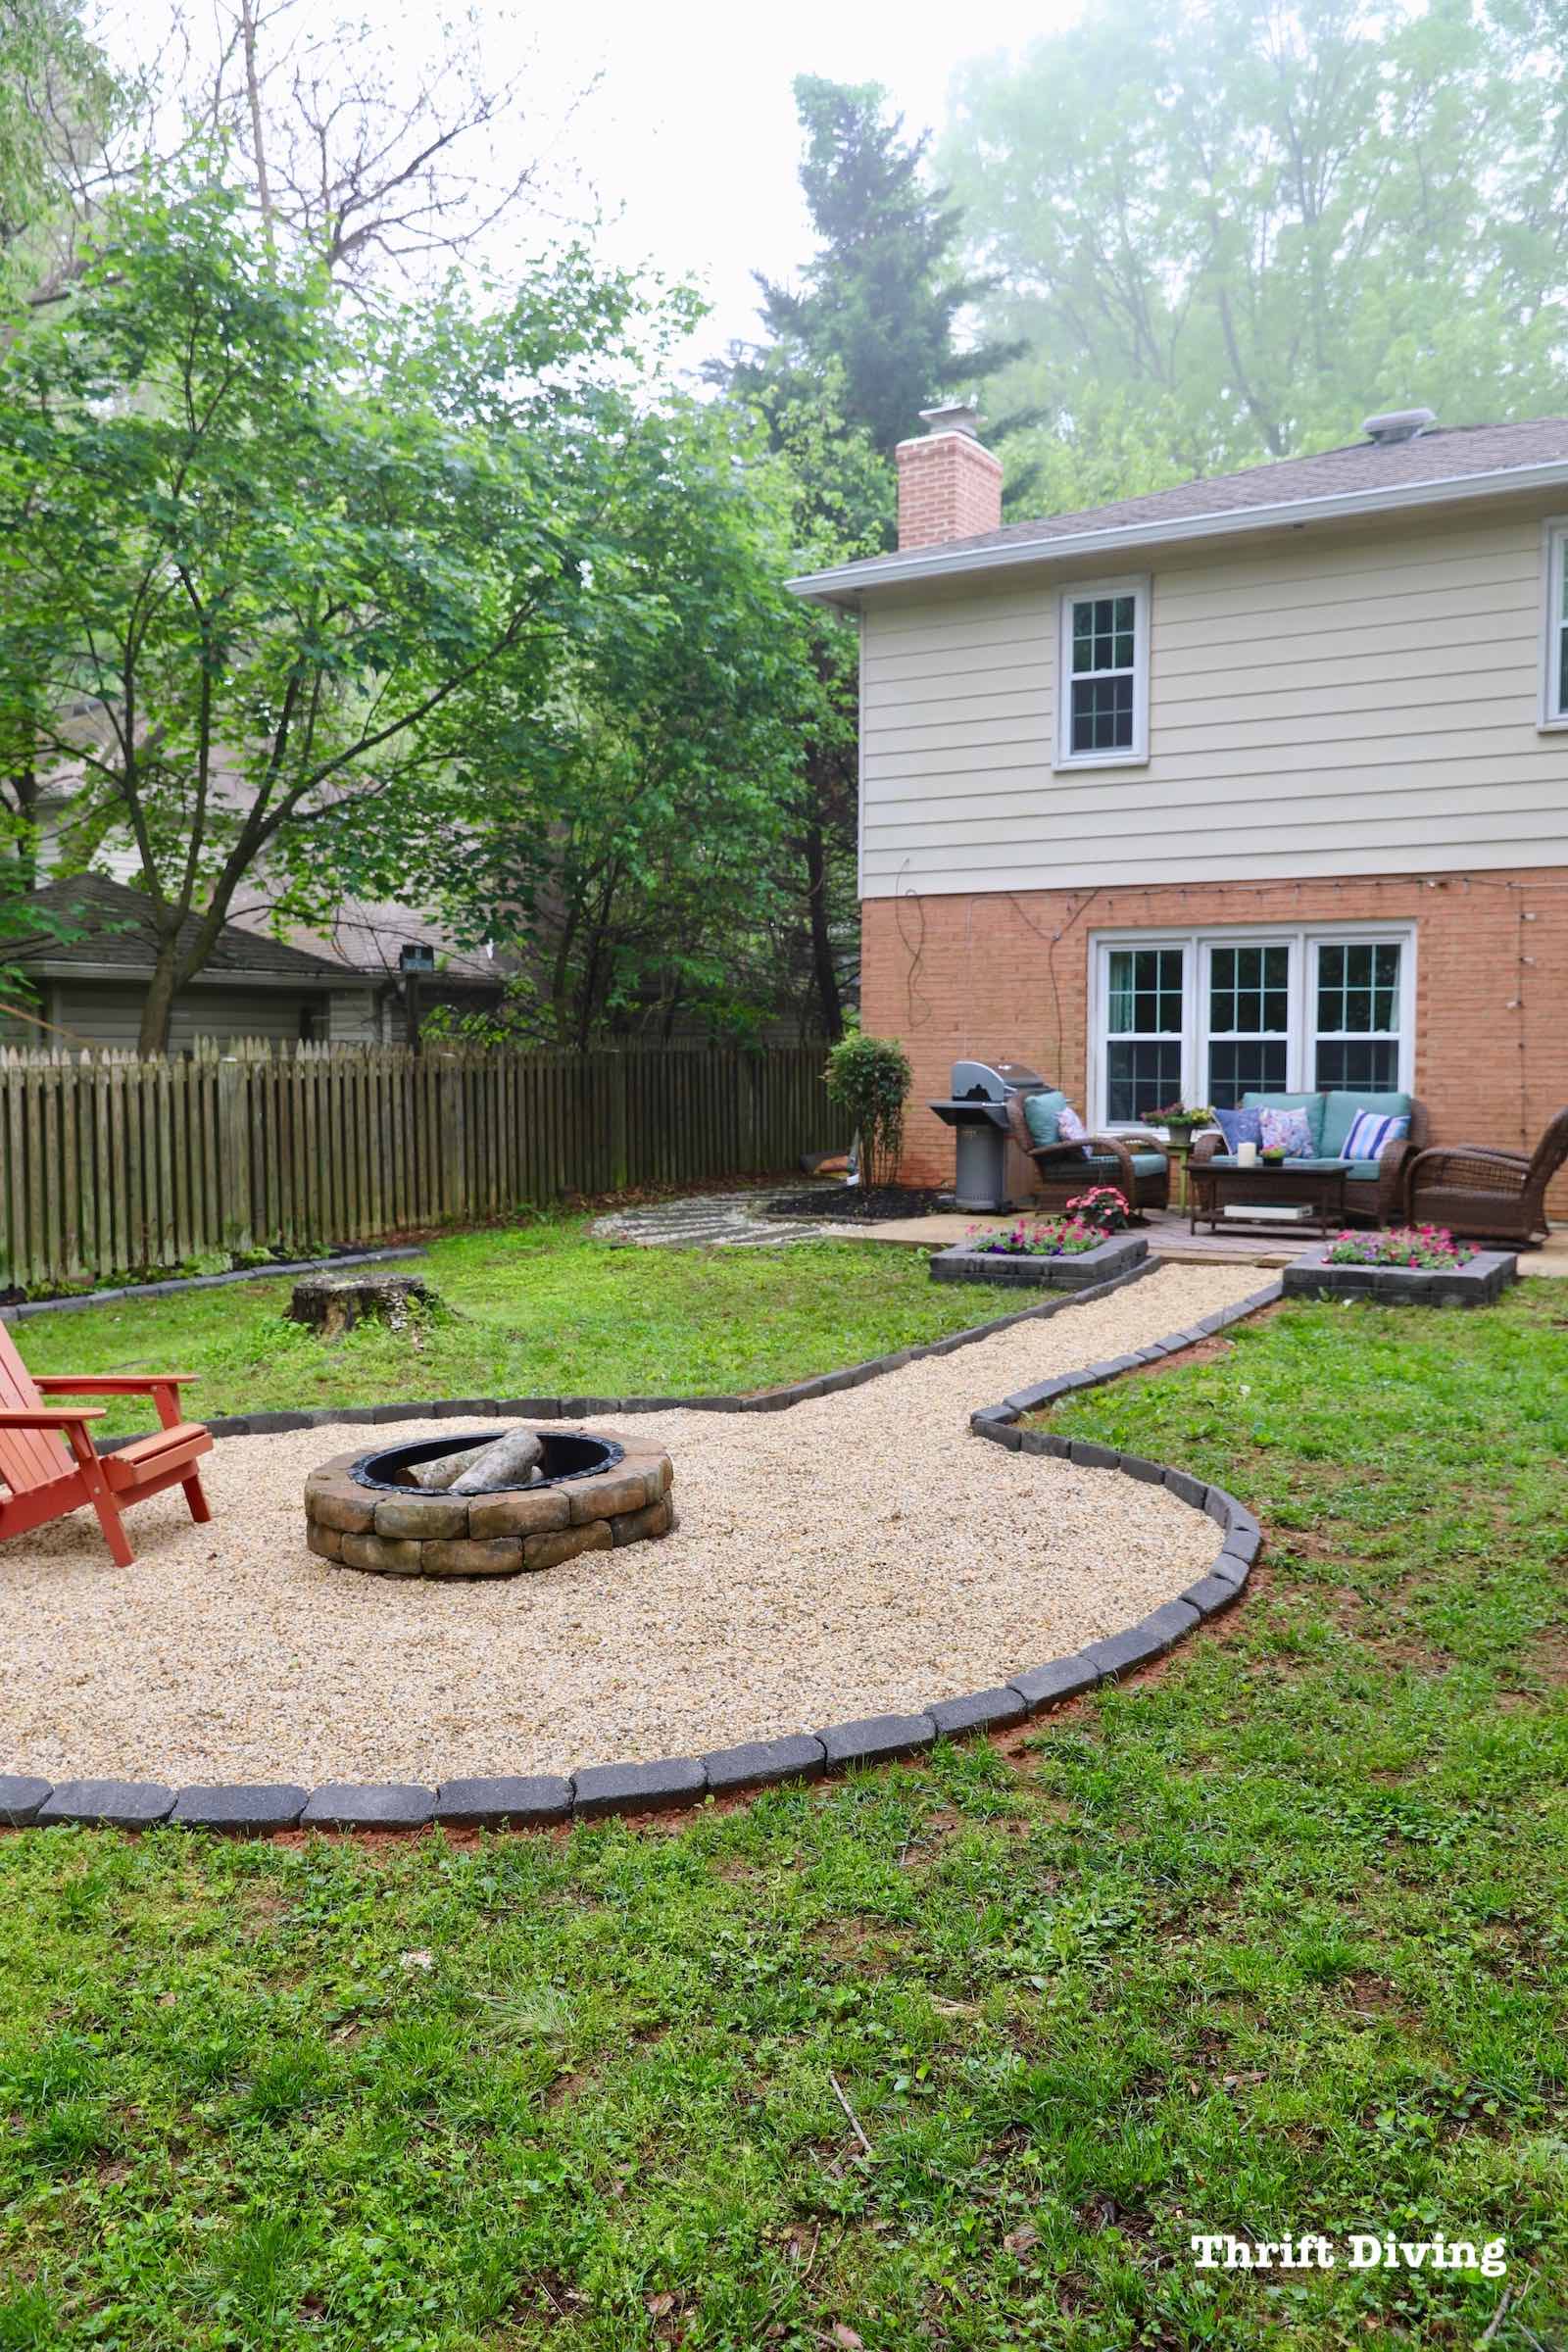 Outdoor Makeover - Creating a DIY Outdoor Makeover - DIY fire pit seating area in the backyard with Pavestone. - Thrift Diving